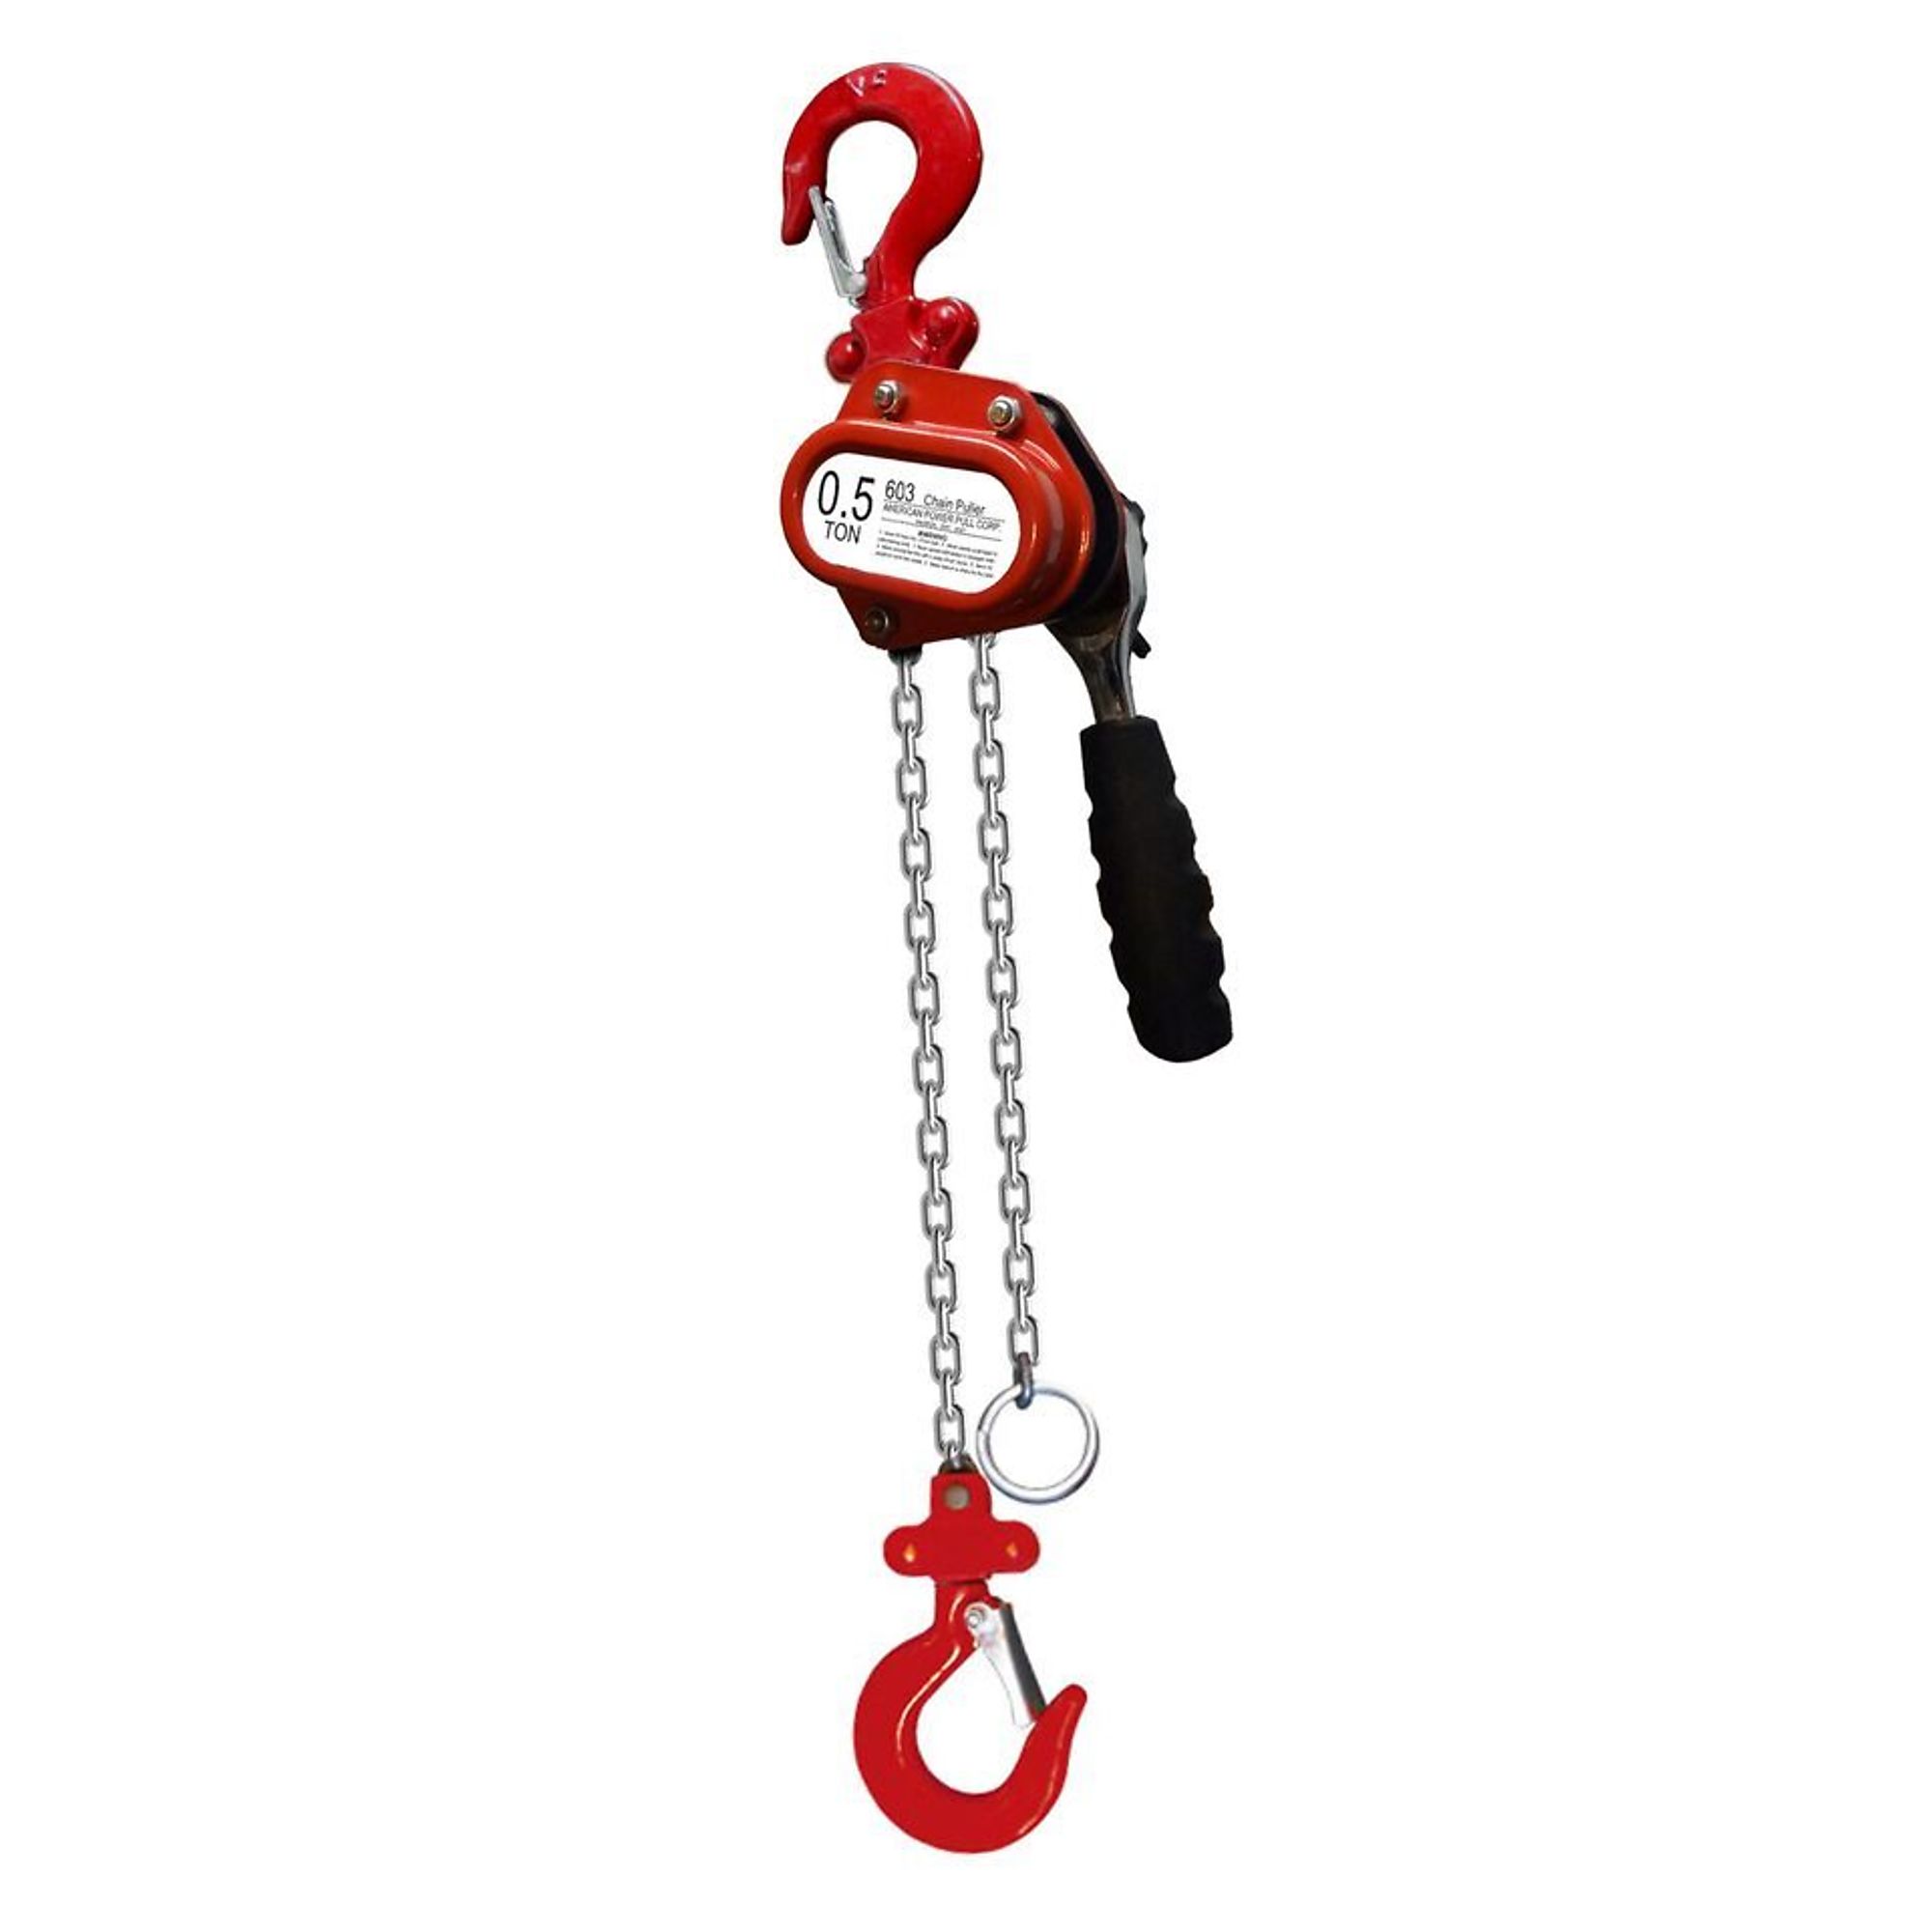 American Power Pull, .5 ton chain puller w/ 20ft. lift, Power Source Manual Lever, Capacity 1000 lb, Lift Height 20 ft, Model 603-20